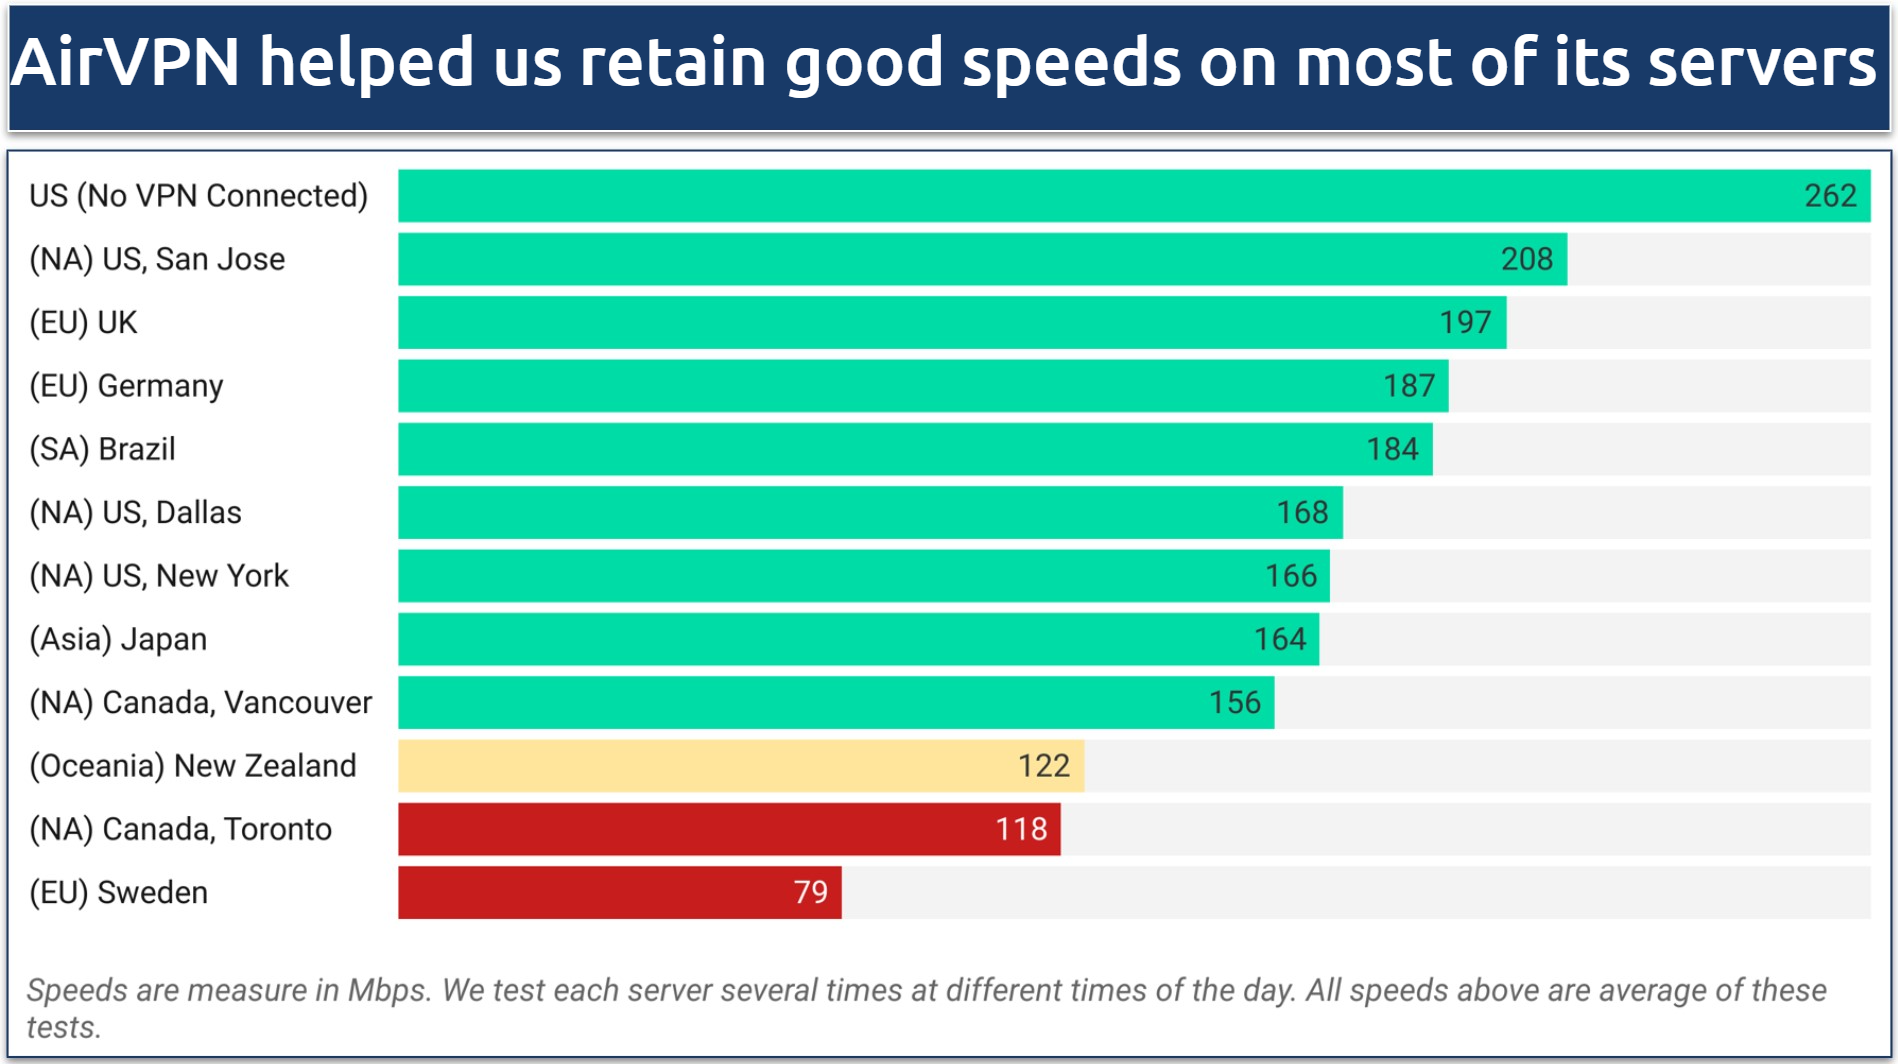 A screenshot showing AirVPN's speed results across servers in North America, Europe, South America, Asia, and Oceania